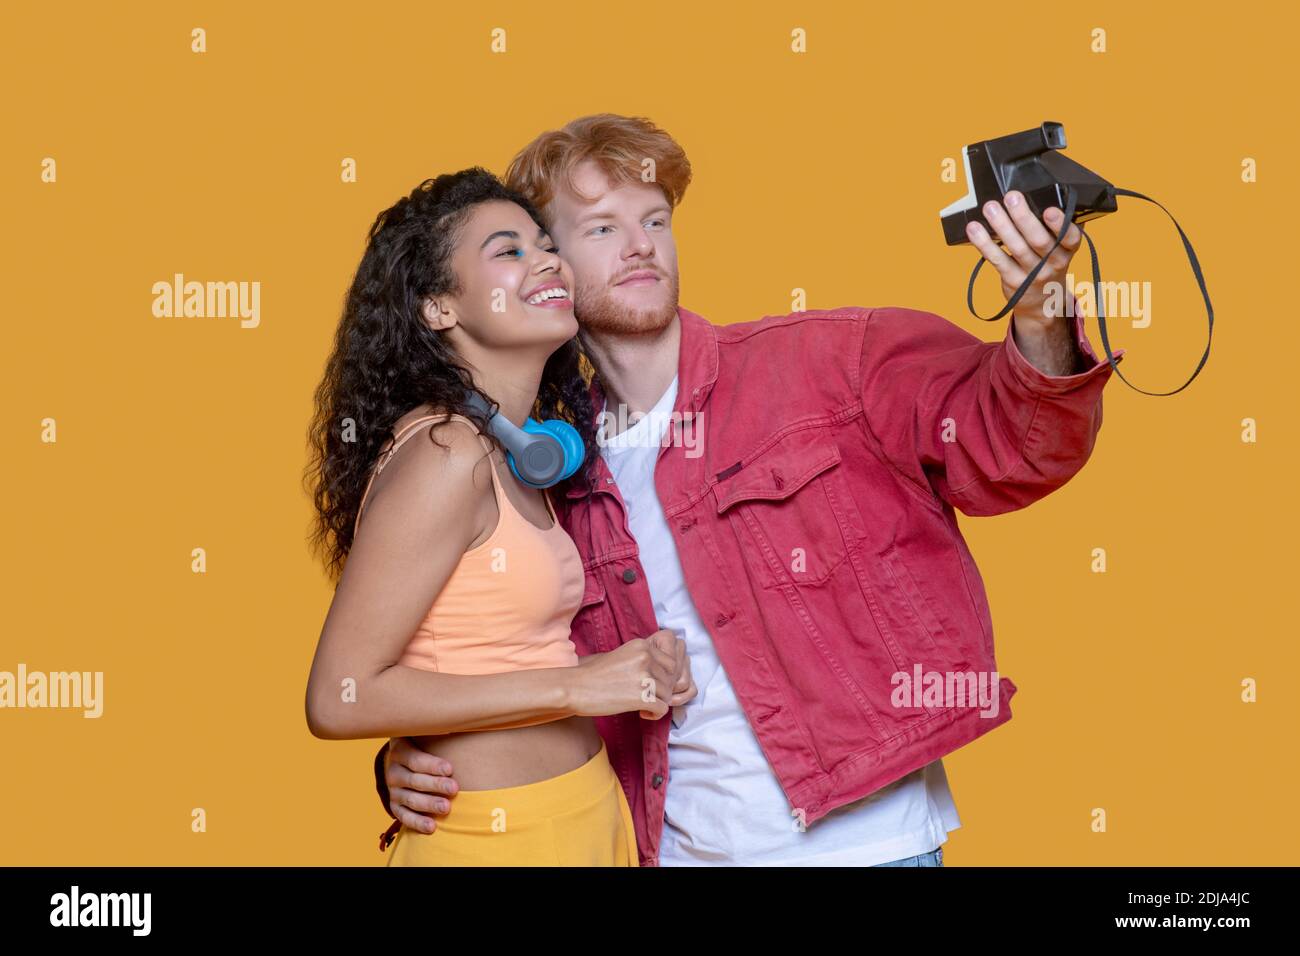 Good-looking young couple making selfie on old camera Stock Photo